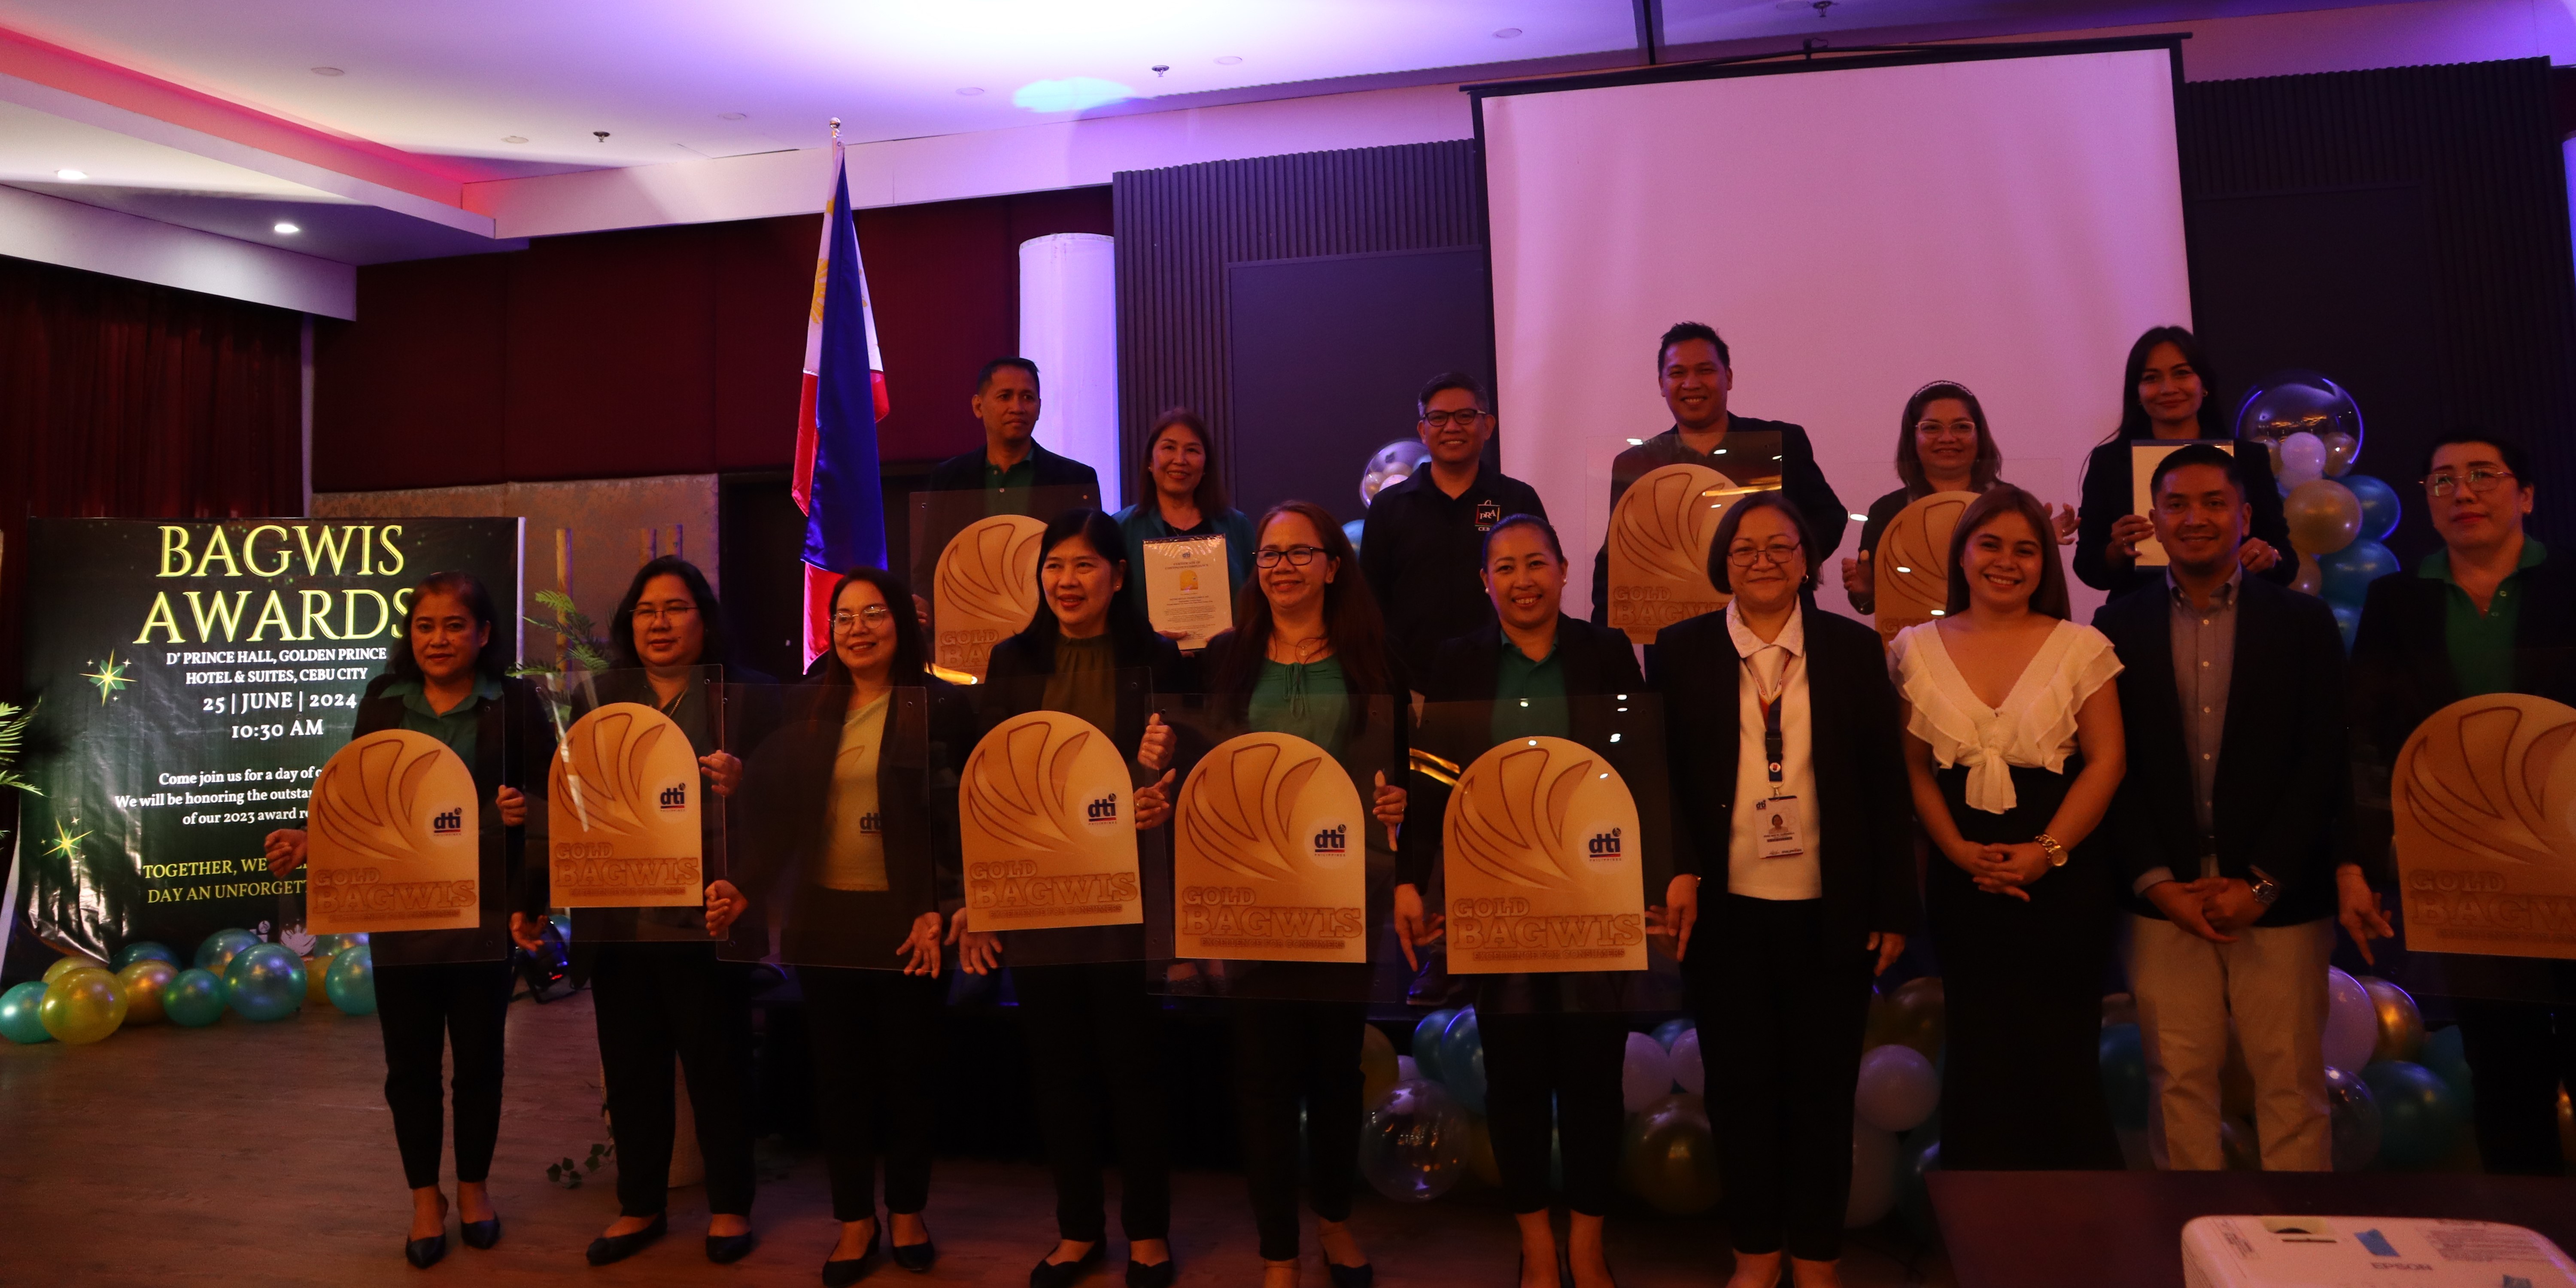 MRSGI honored with 10 DTI Gold Bagwis Awards for Excellence